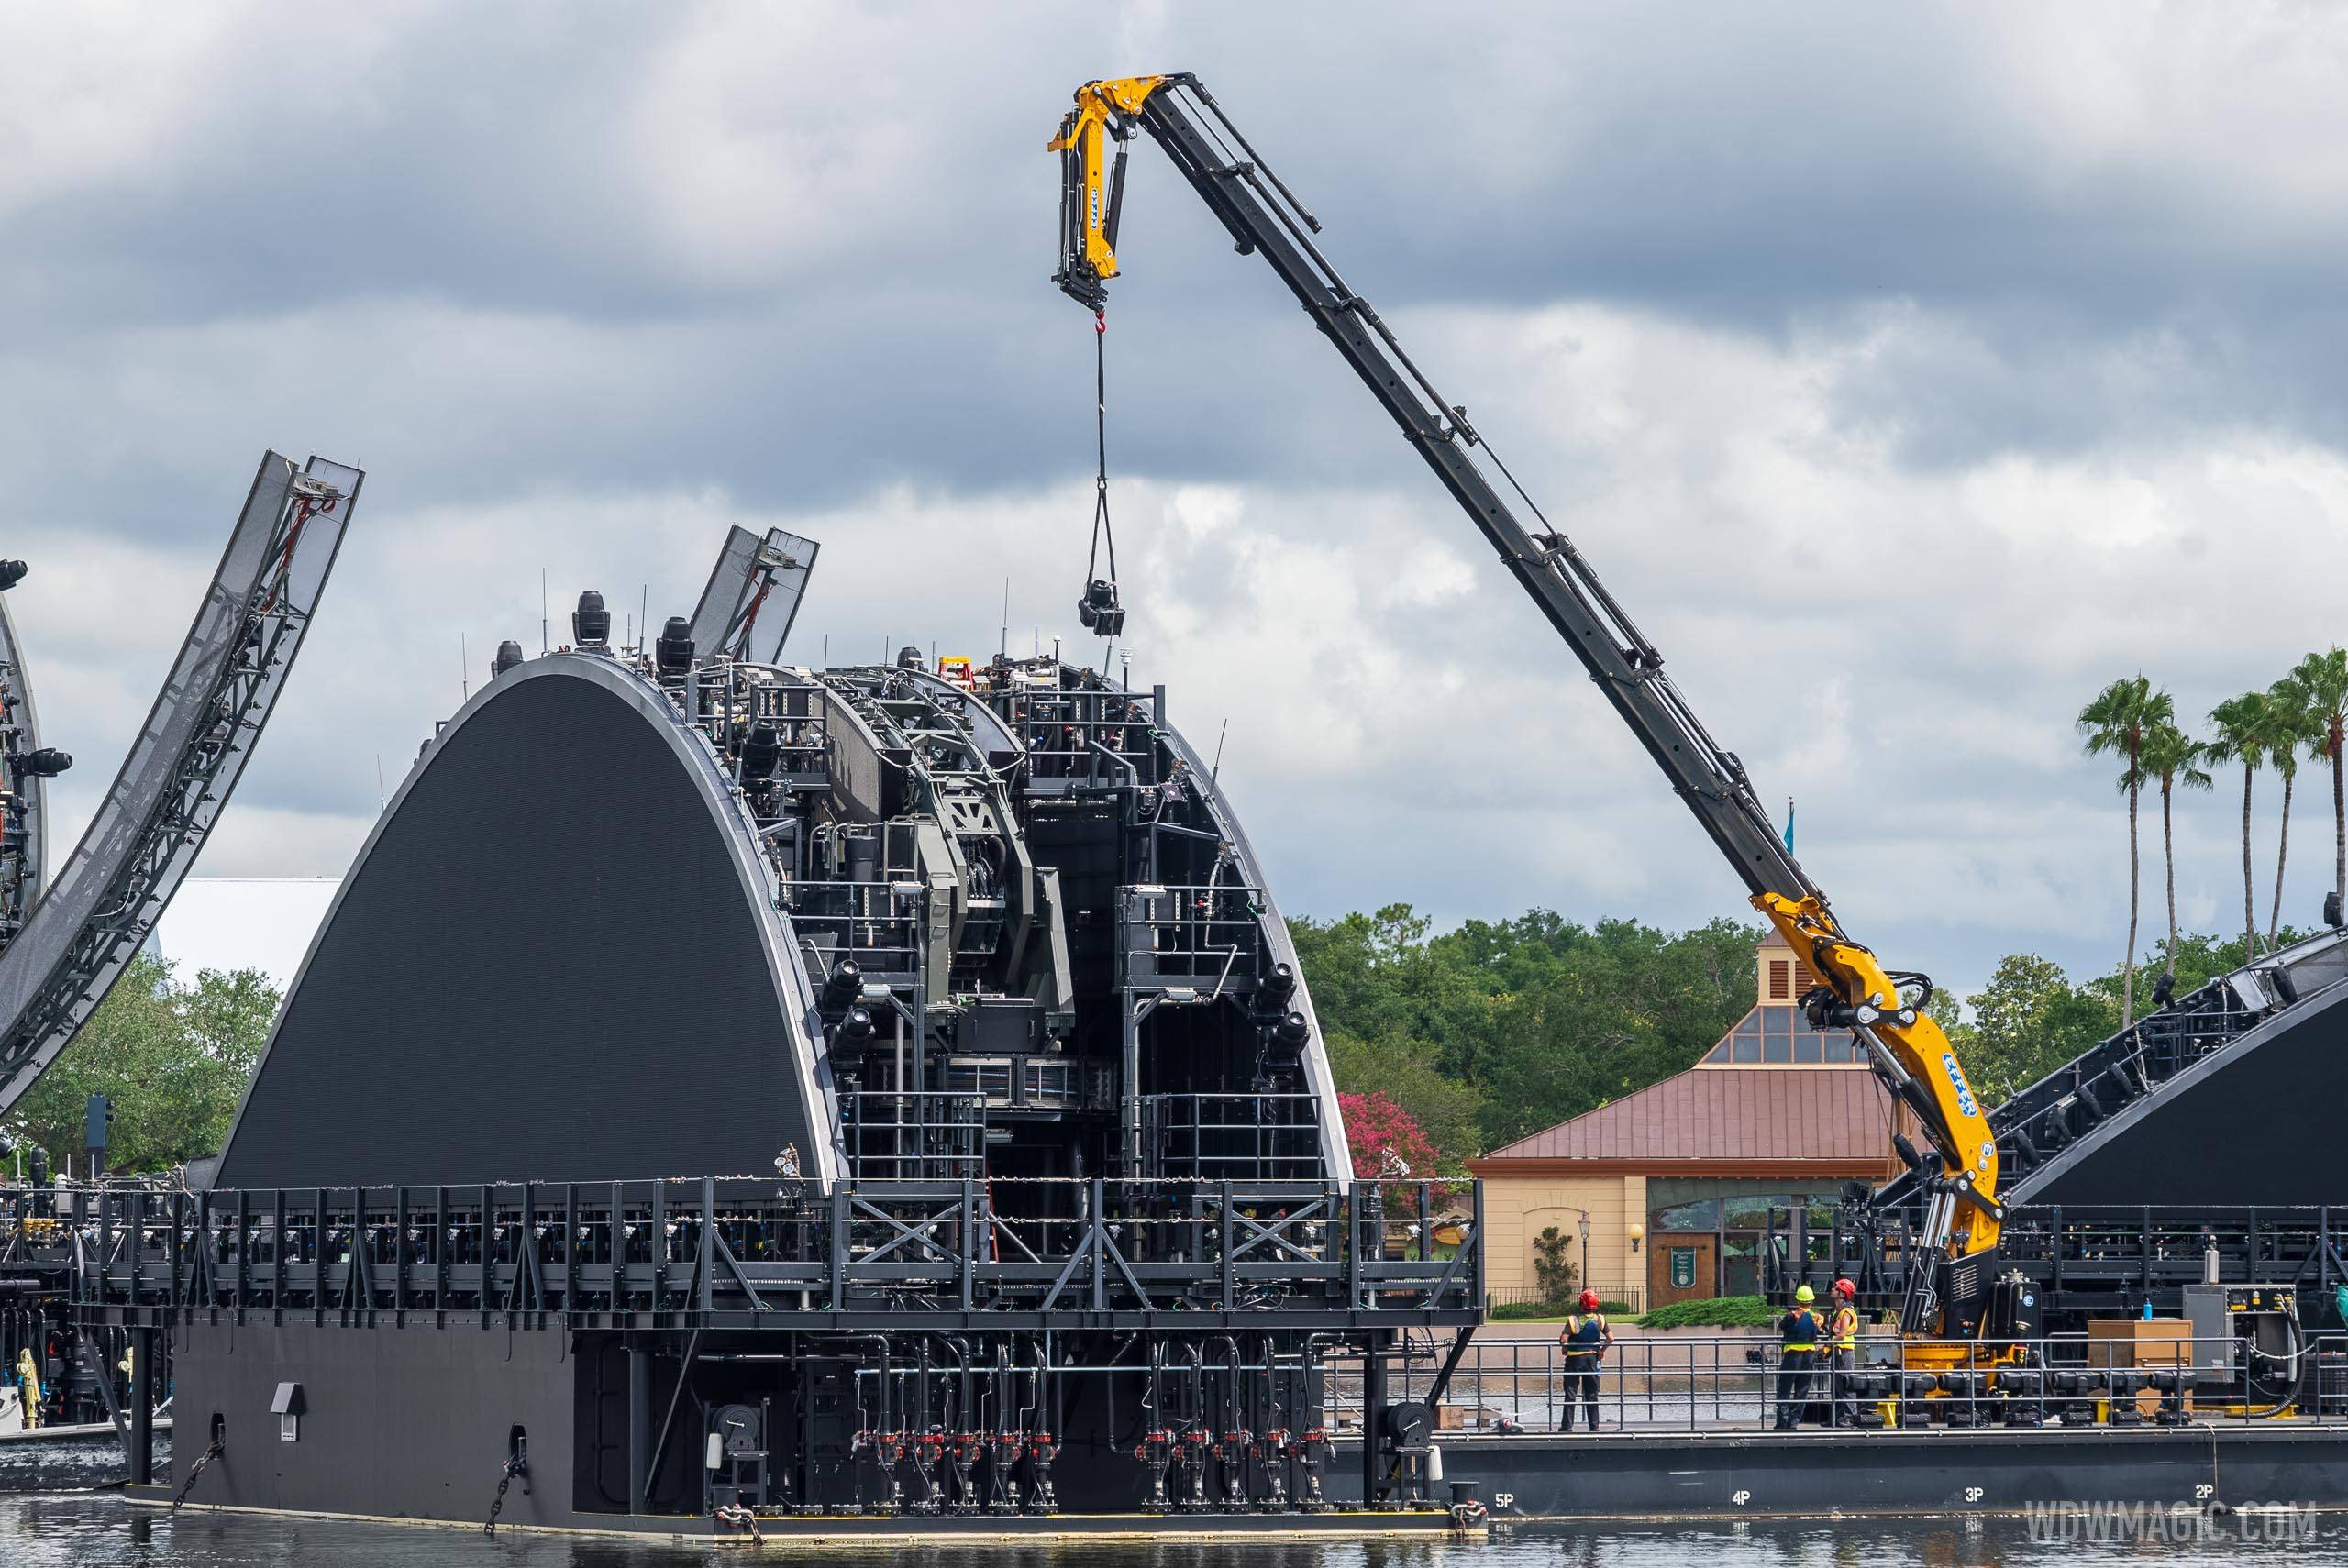 Hardware being removed from the Harmonious show platform barges at EPCOT